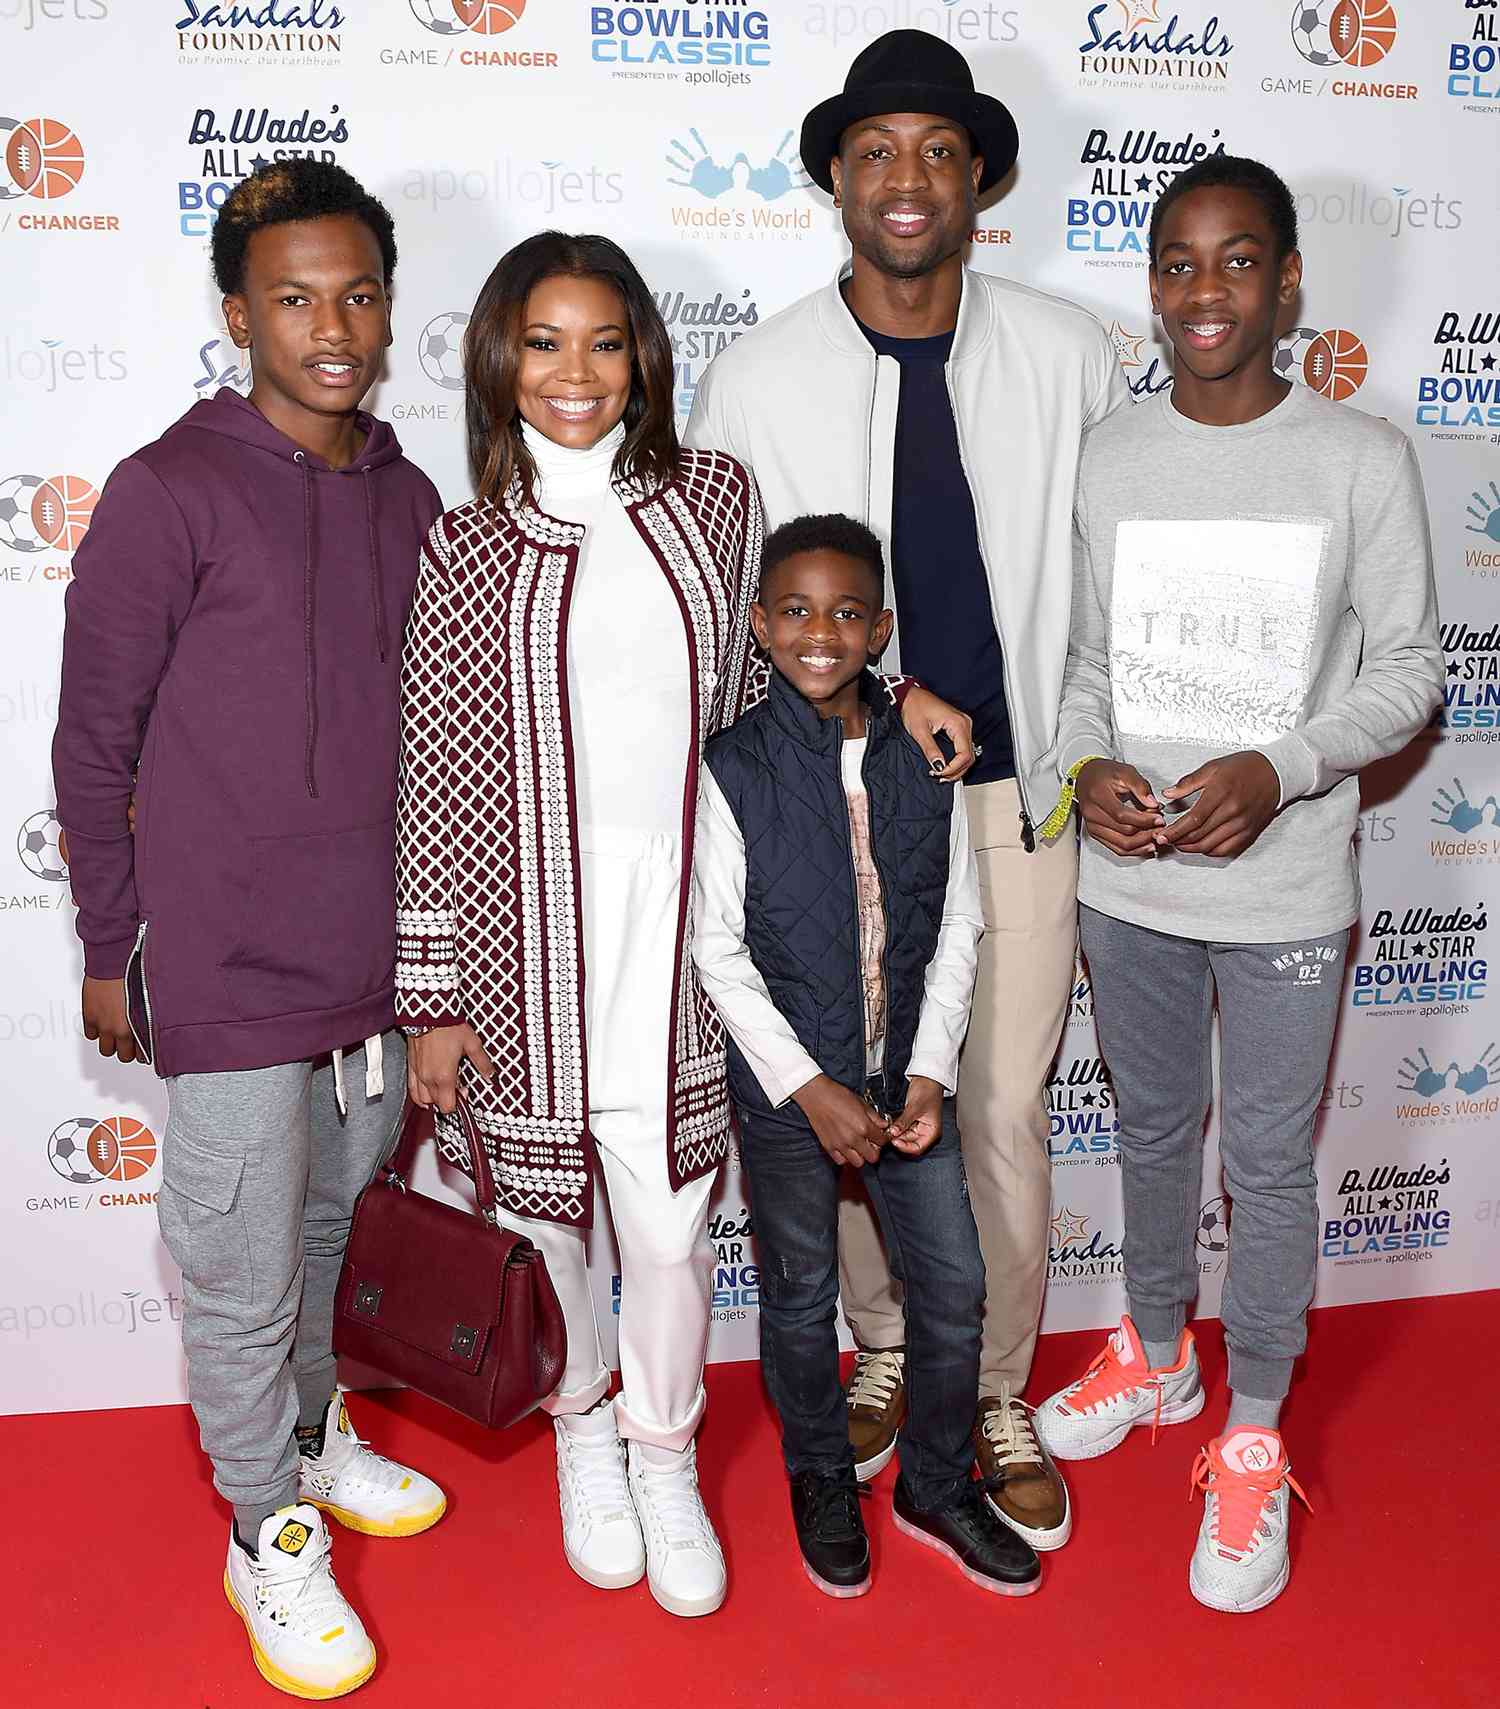 Dahveon Morris, Gabrielle Union, Zion Wade, Dwyane Wade, and Zaire Wade attend the DWade All Star Bowling Classic Benefitting The Sandals Foundation And Wade's World Foundation at The Ballroom on February 13, 2016 in Toronto, Canada